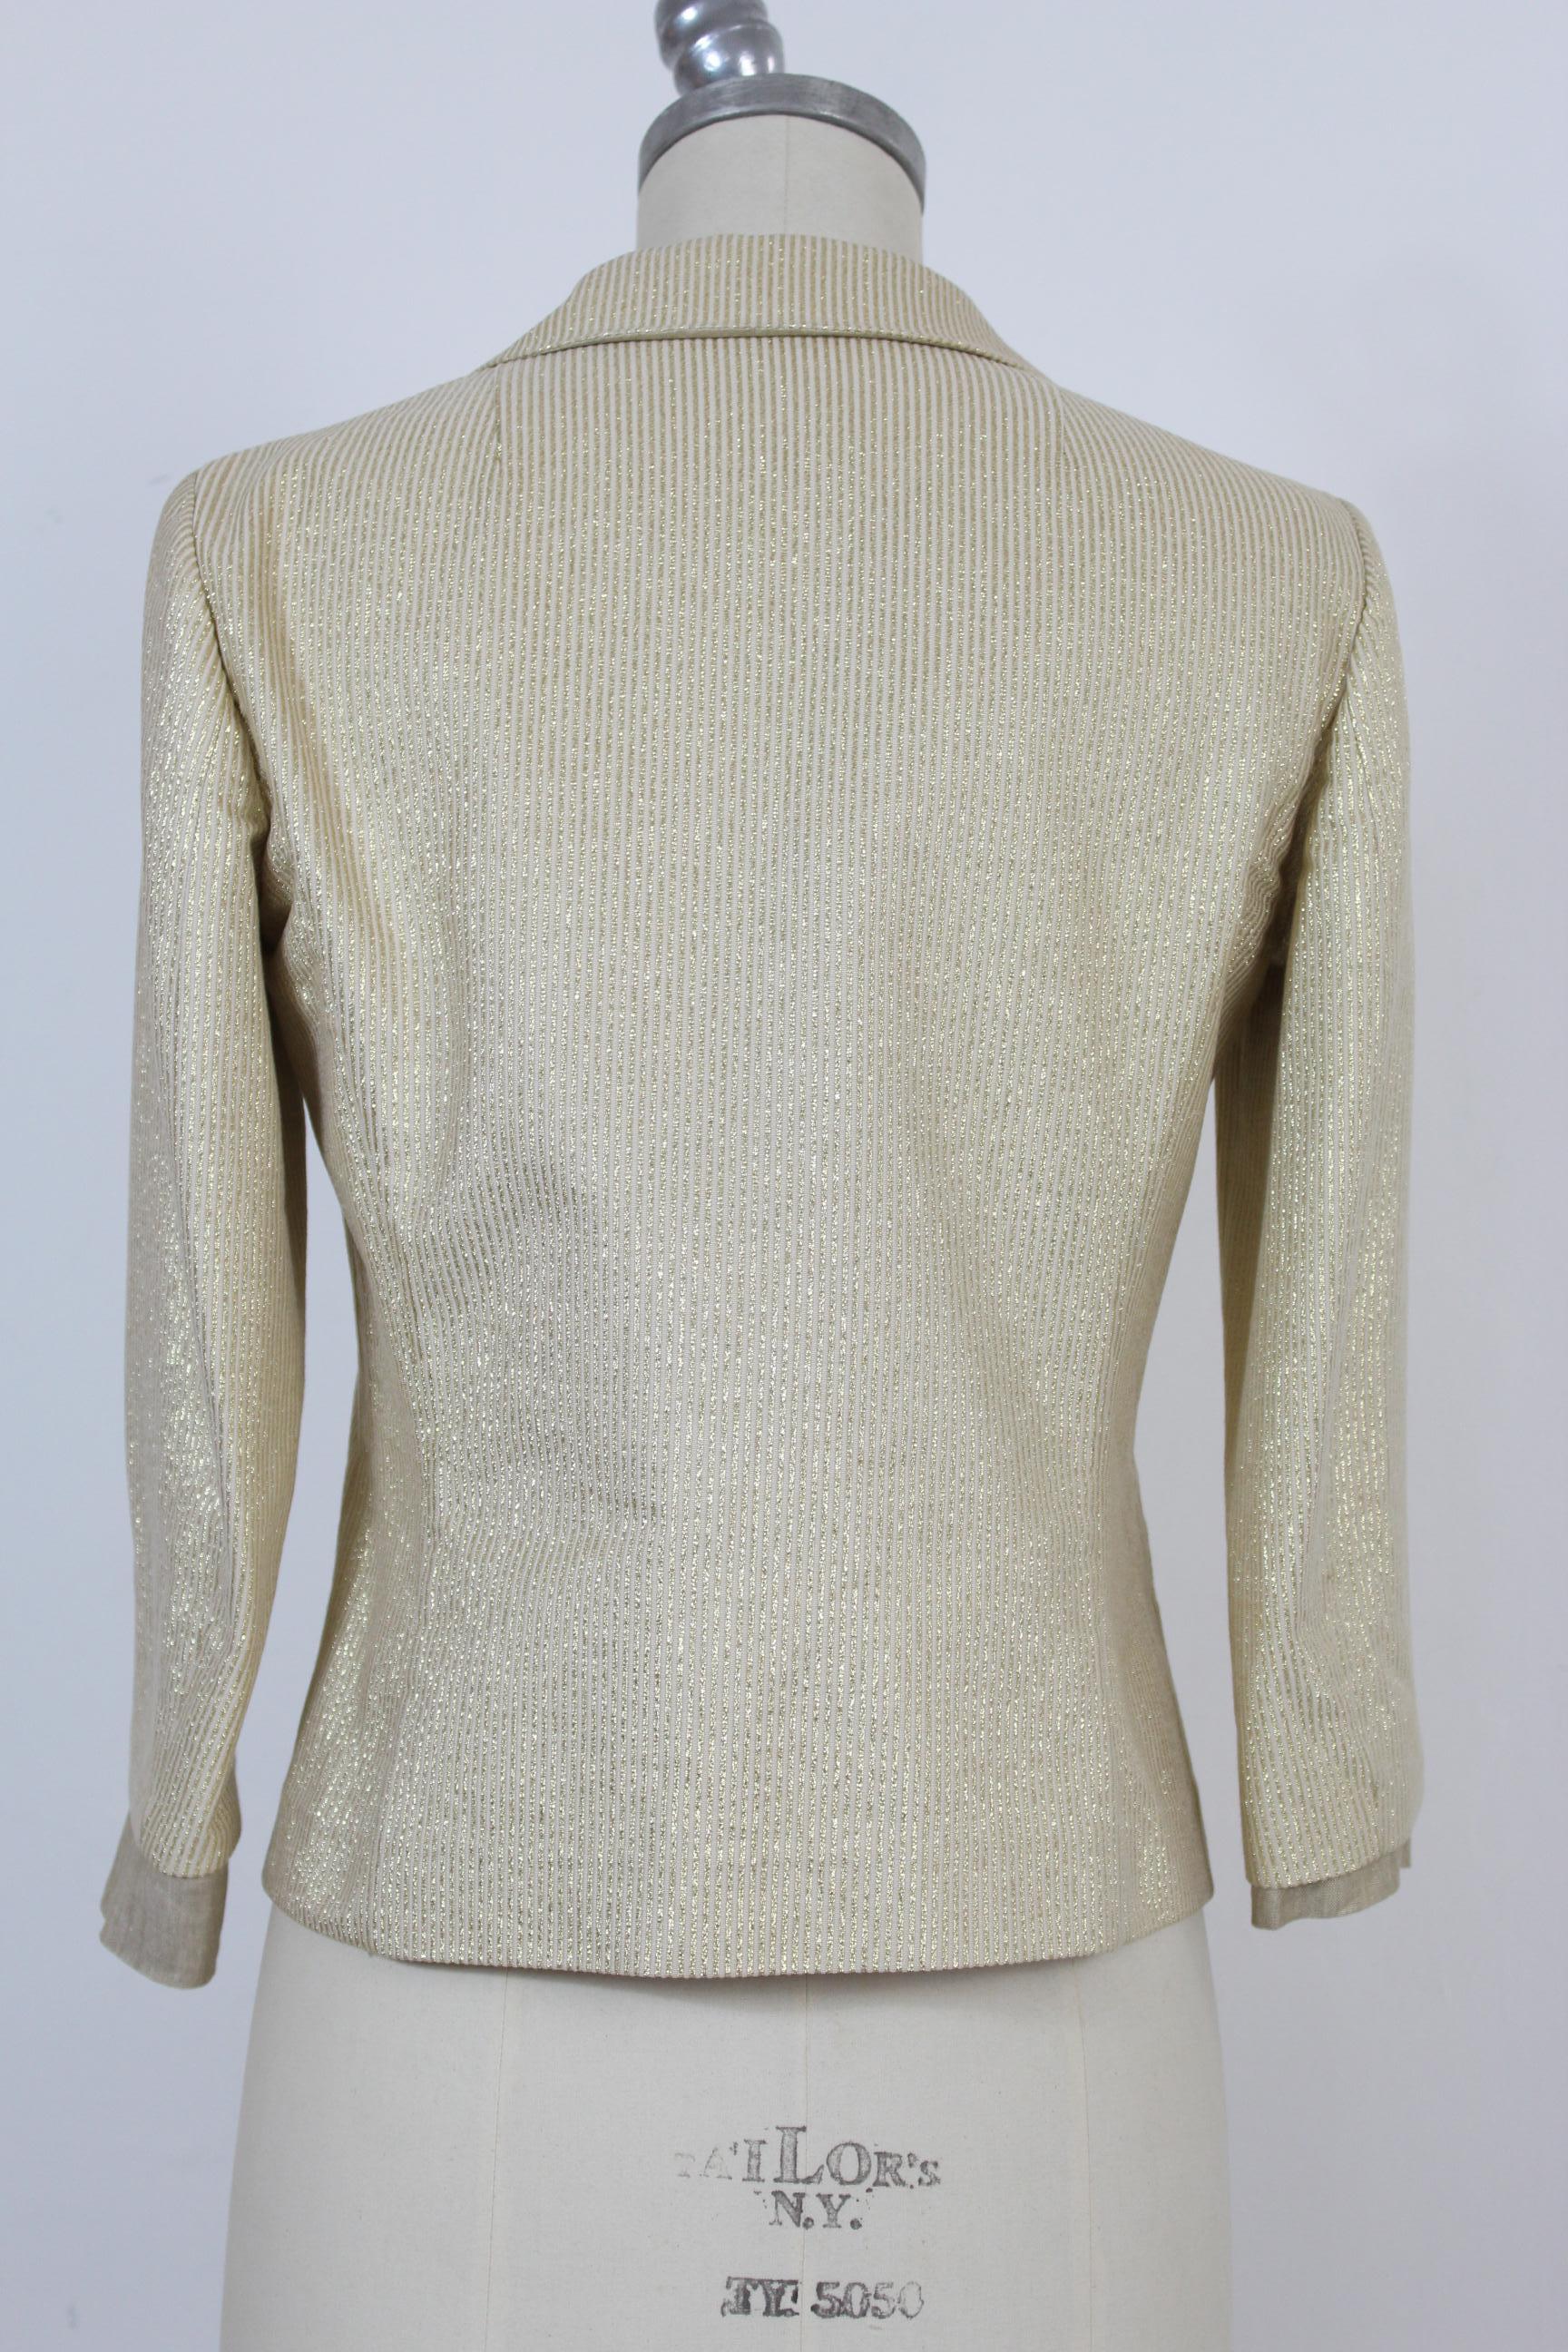 Etro vintage short jacket from the 2000s. Pinstripe, beige, with golden stripes. Pockets and front buttoning, logoed beige buttons. Elegant, 3/4 sleeves with cuff. Composition 56% cotton, 39% polyester, 5% nylon. Lining 53% acetate, 47% polyester.